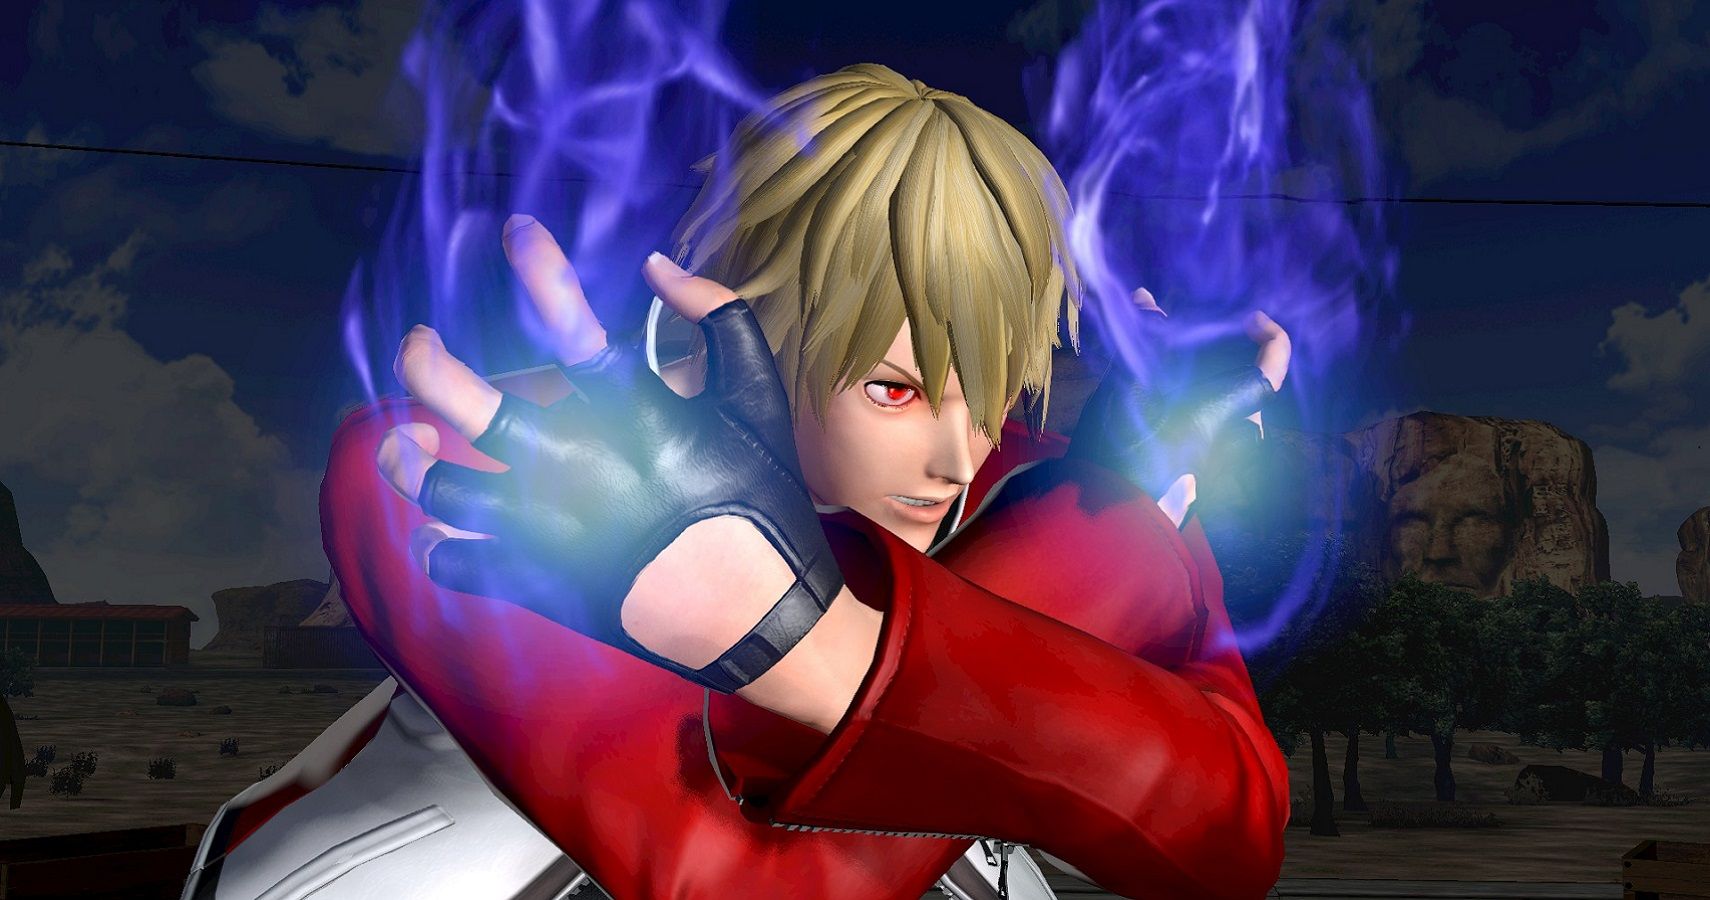 The King of Fighters 14 Ultimate Edition Comes Jam Packed With All The DLC This Month